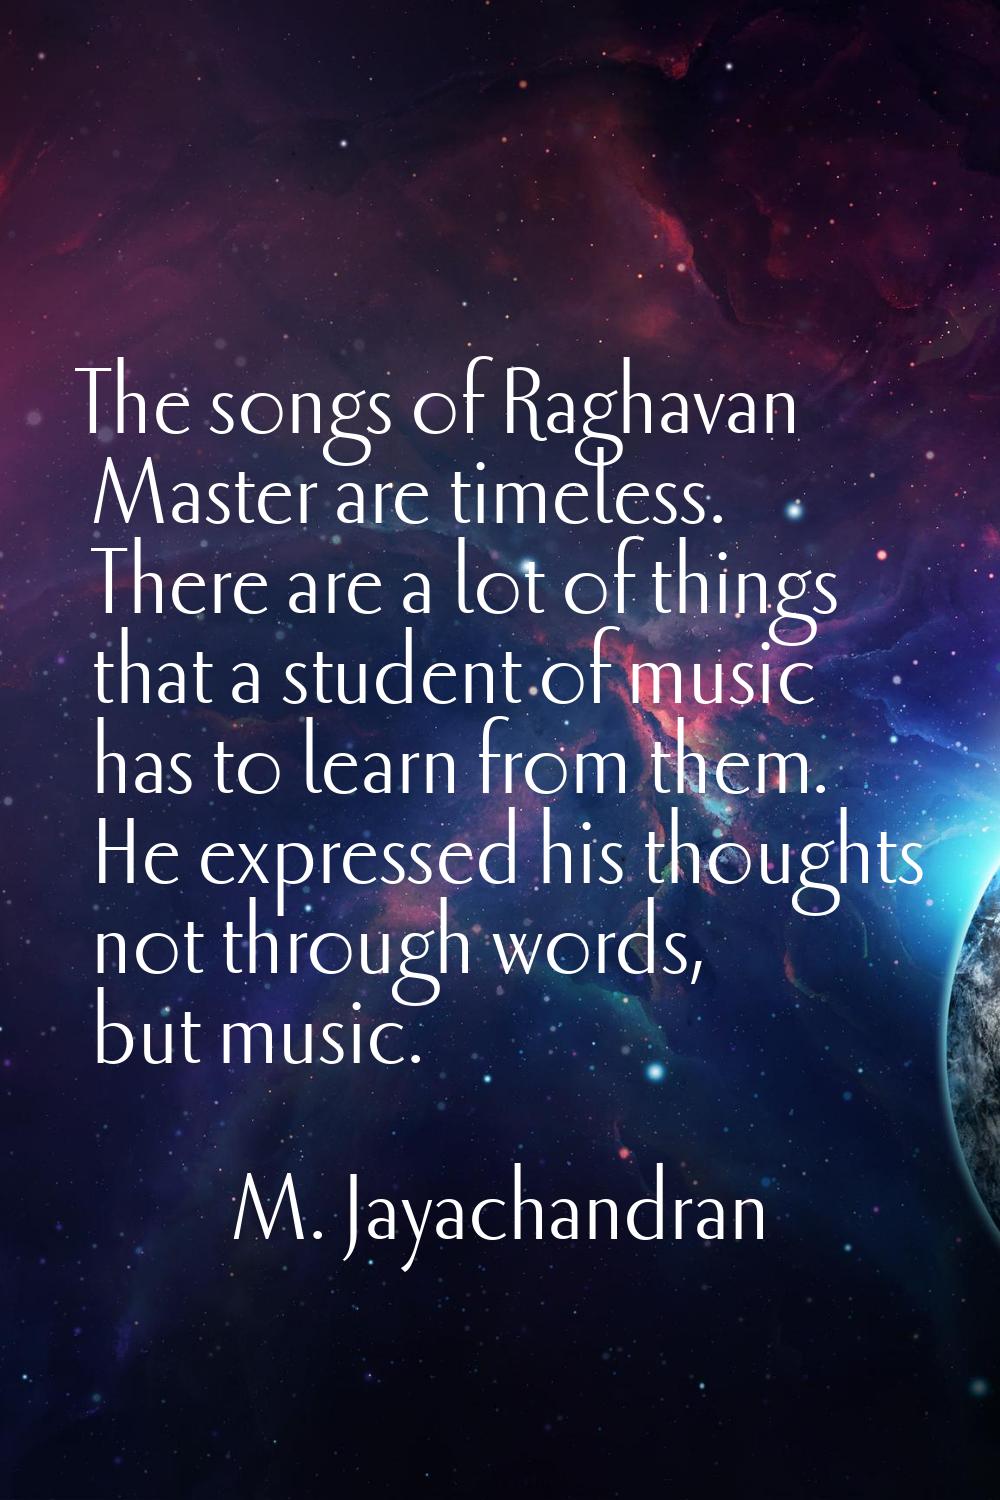 The songs of Raghavan Master are timeless. There are a lot of things that a student of music has to